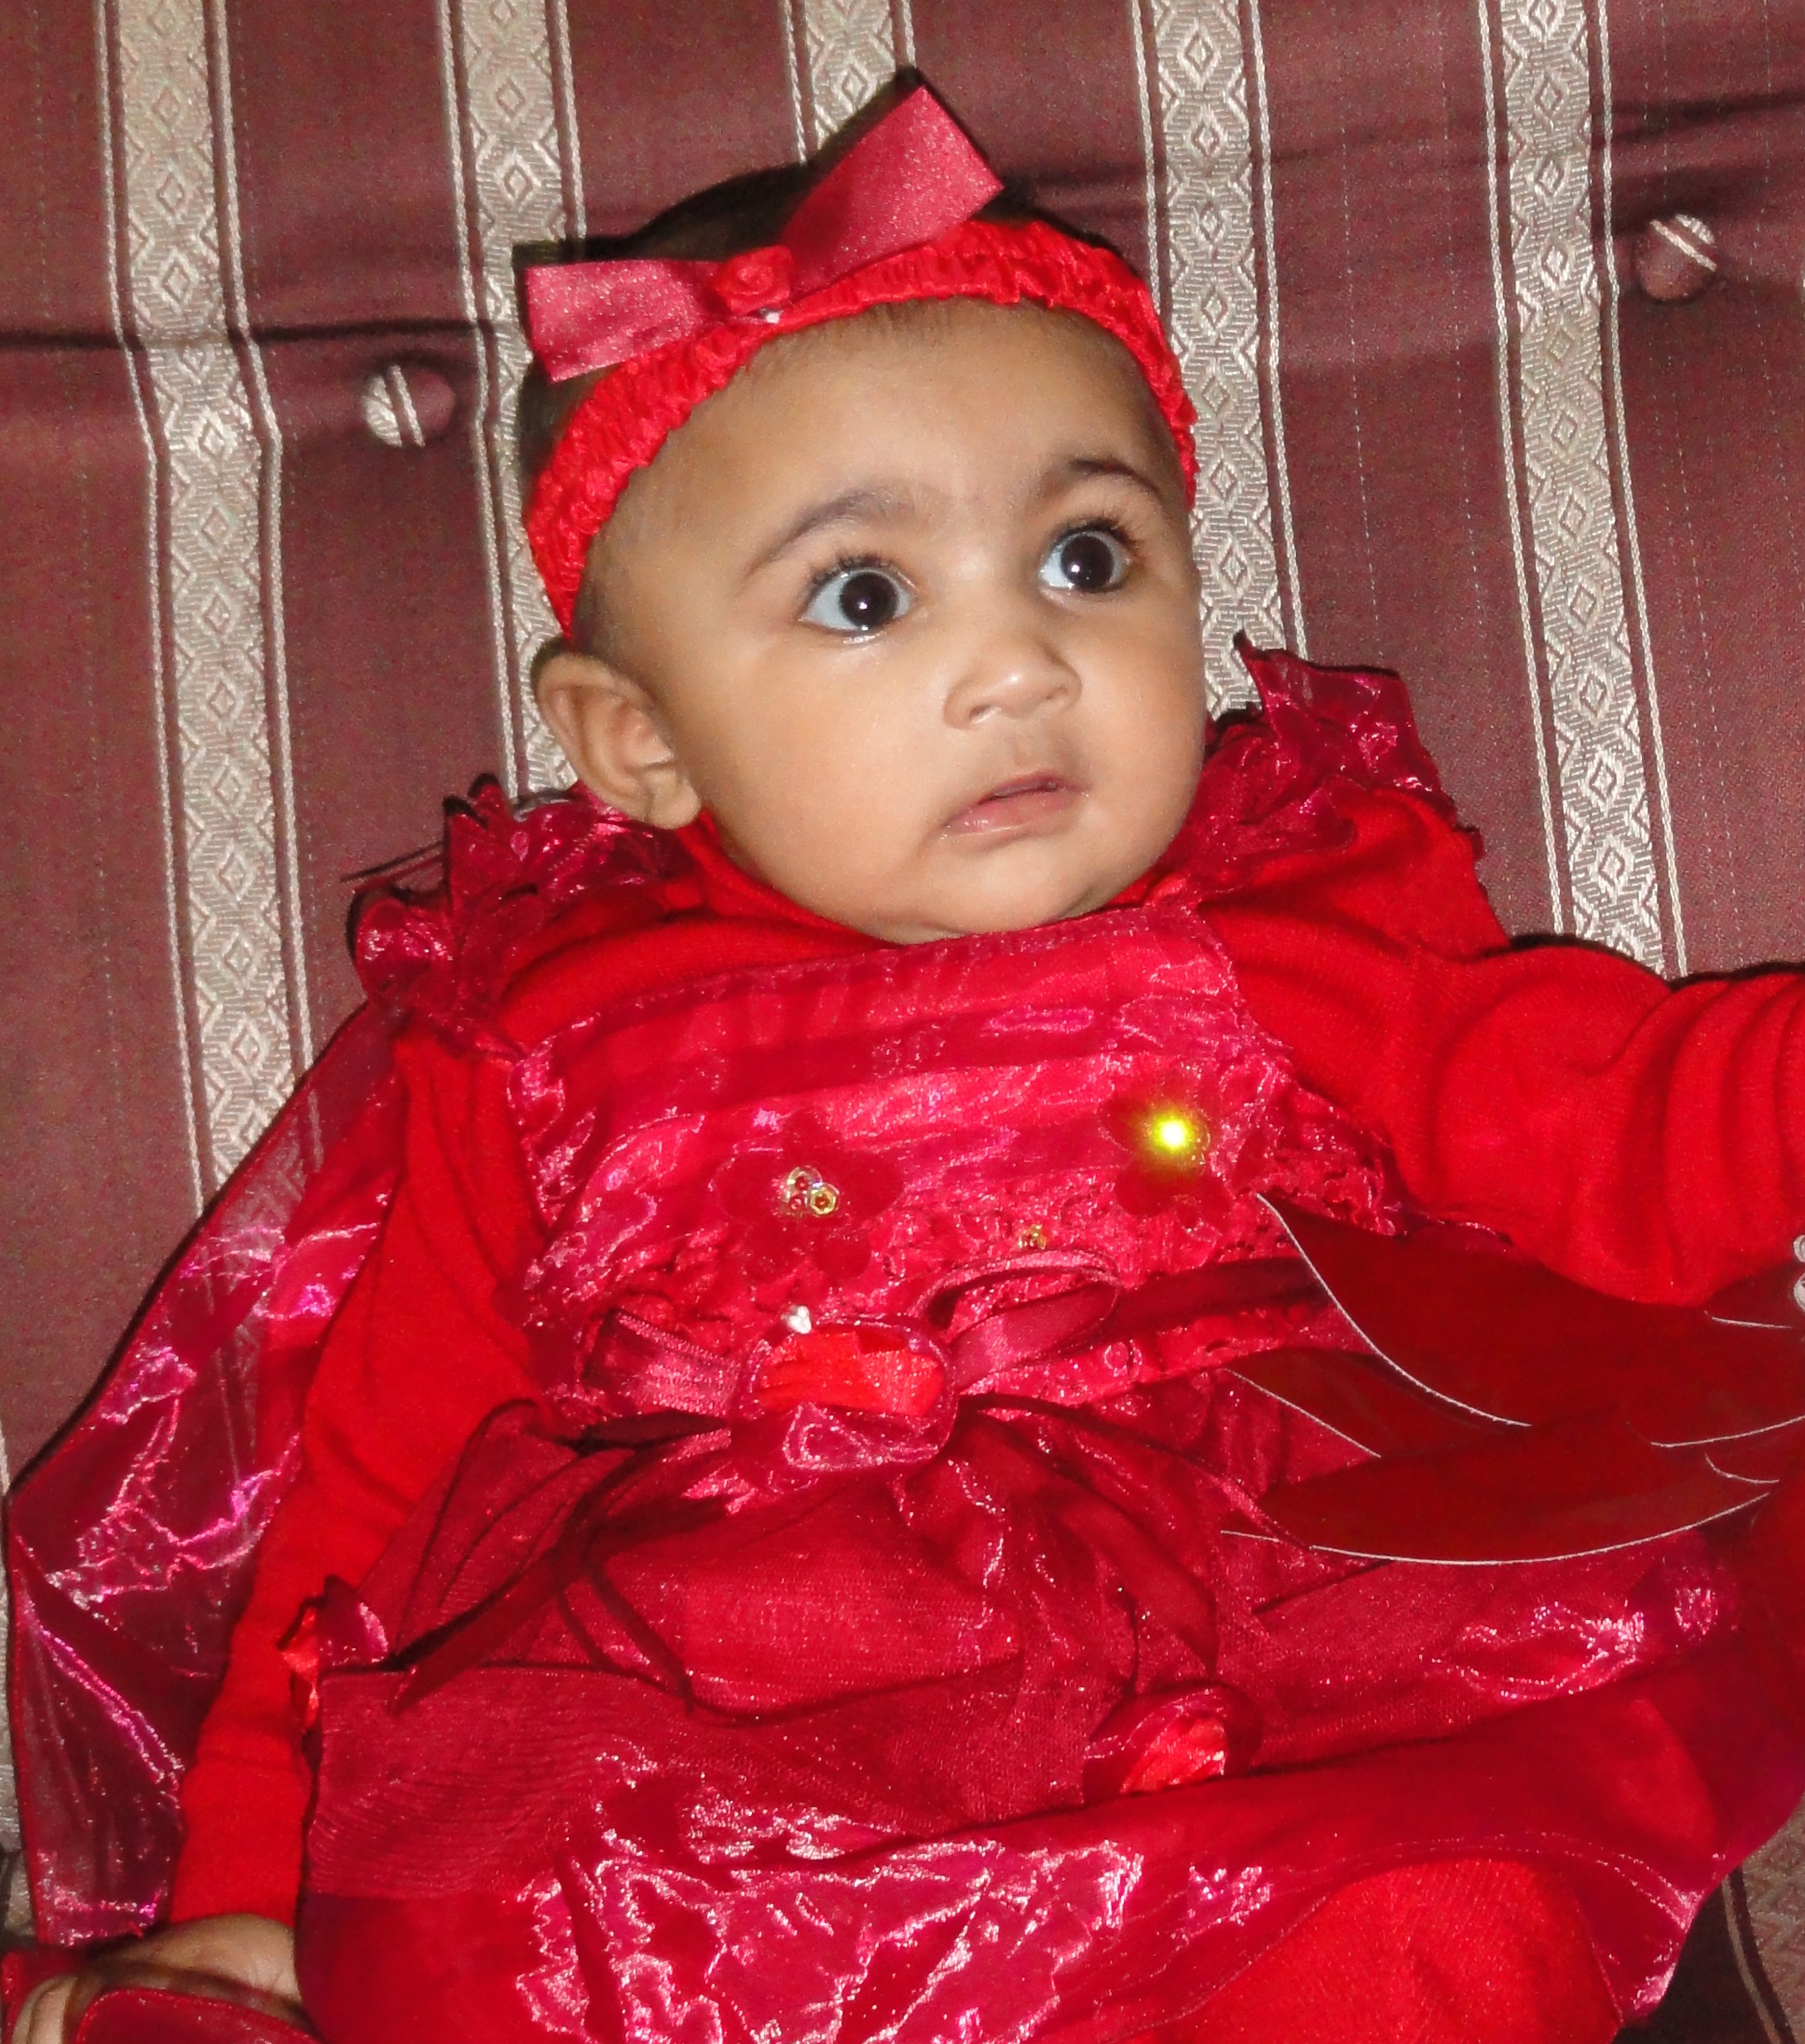 Cute Baby Girl in red dress | Cute Babies Pictures